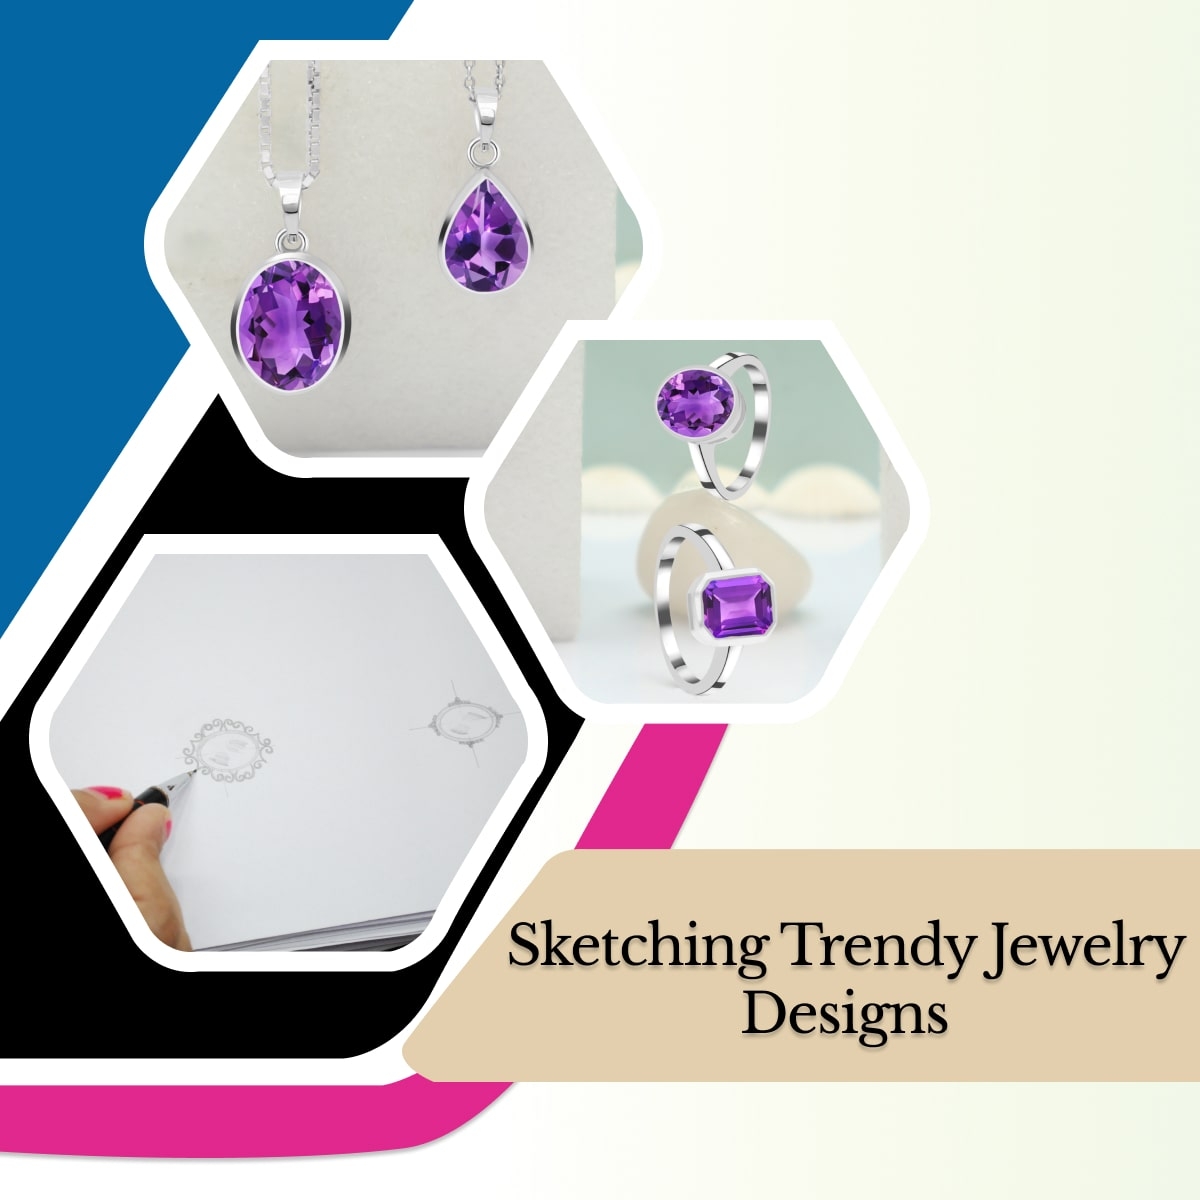 How to Create Sketches of Jewelry Designs